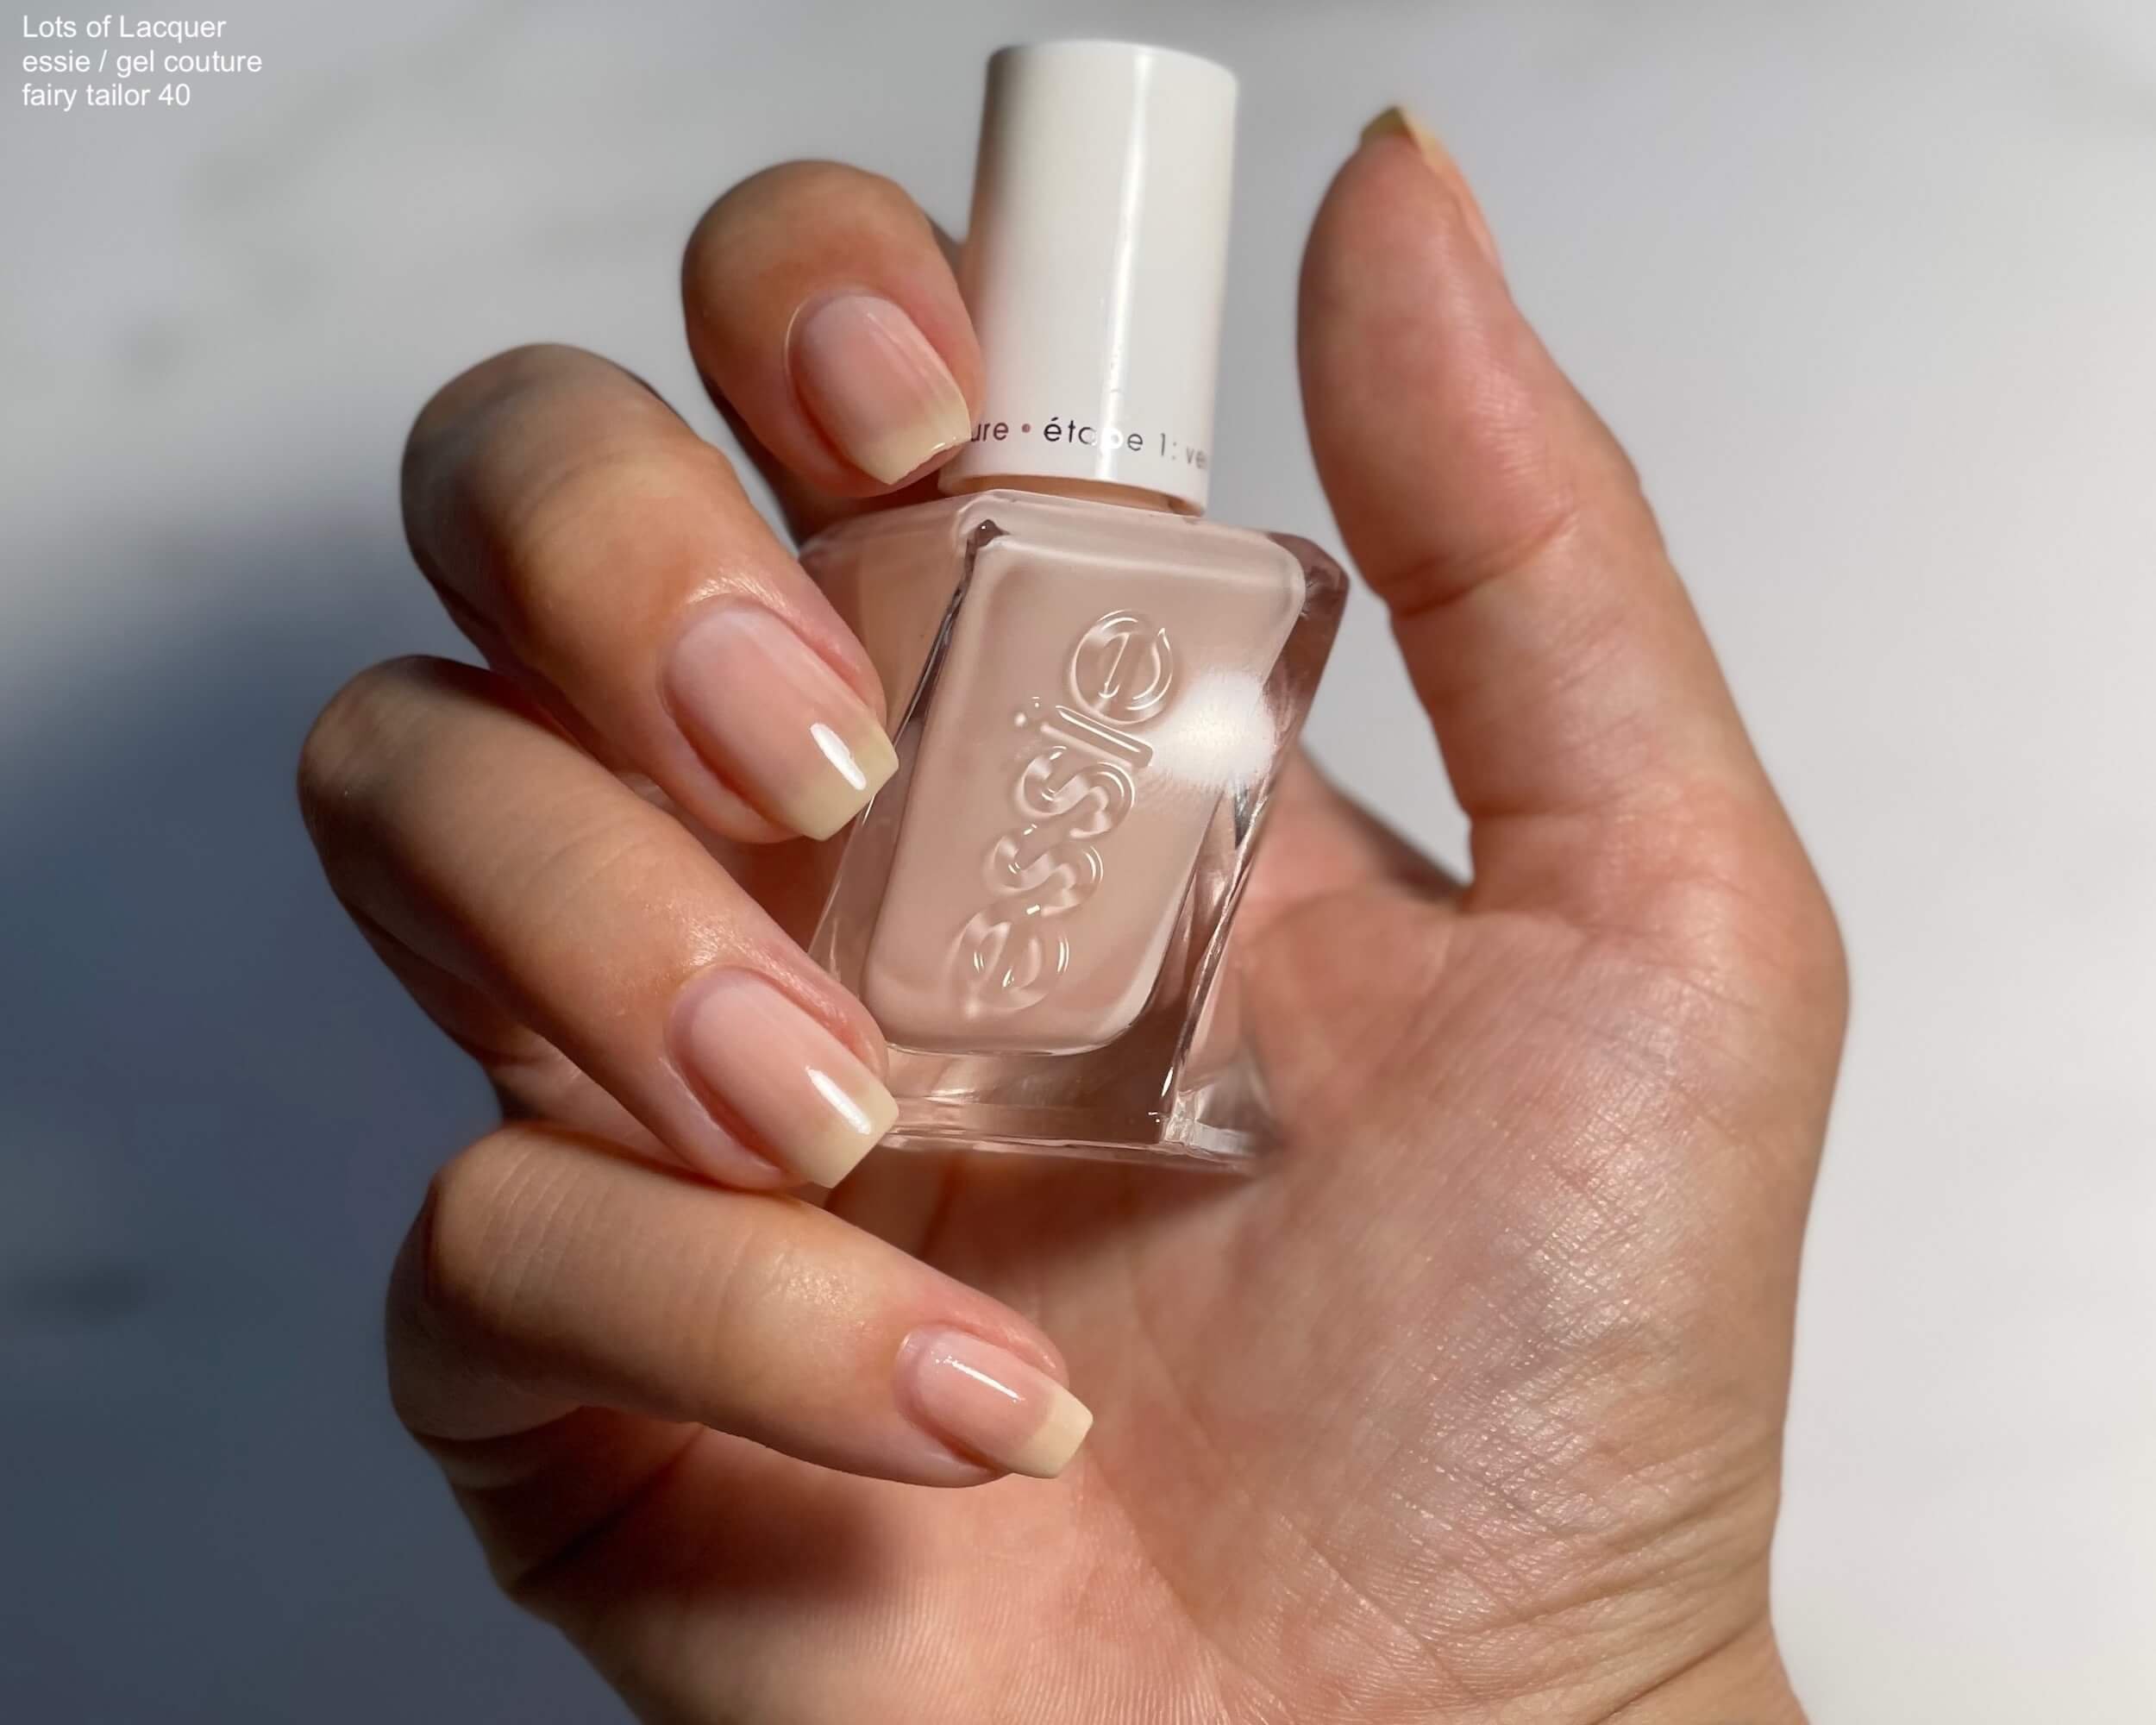 2. Essie Gel Couture Nail Polish in "Fairy Tailor" - wide 7